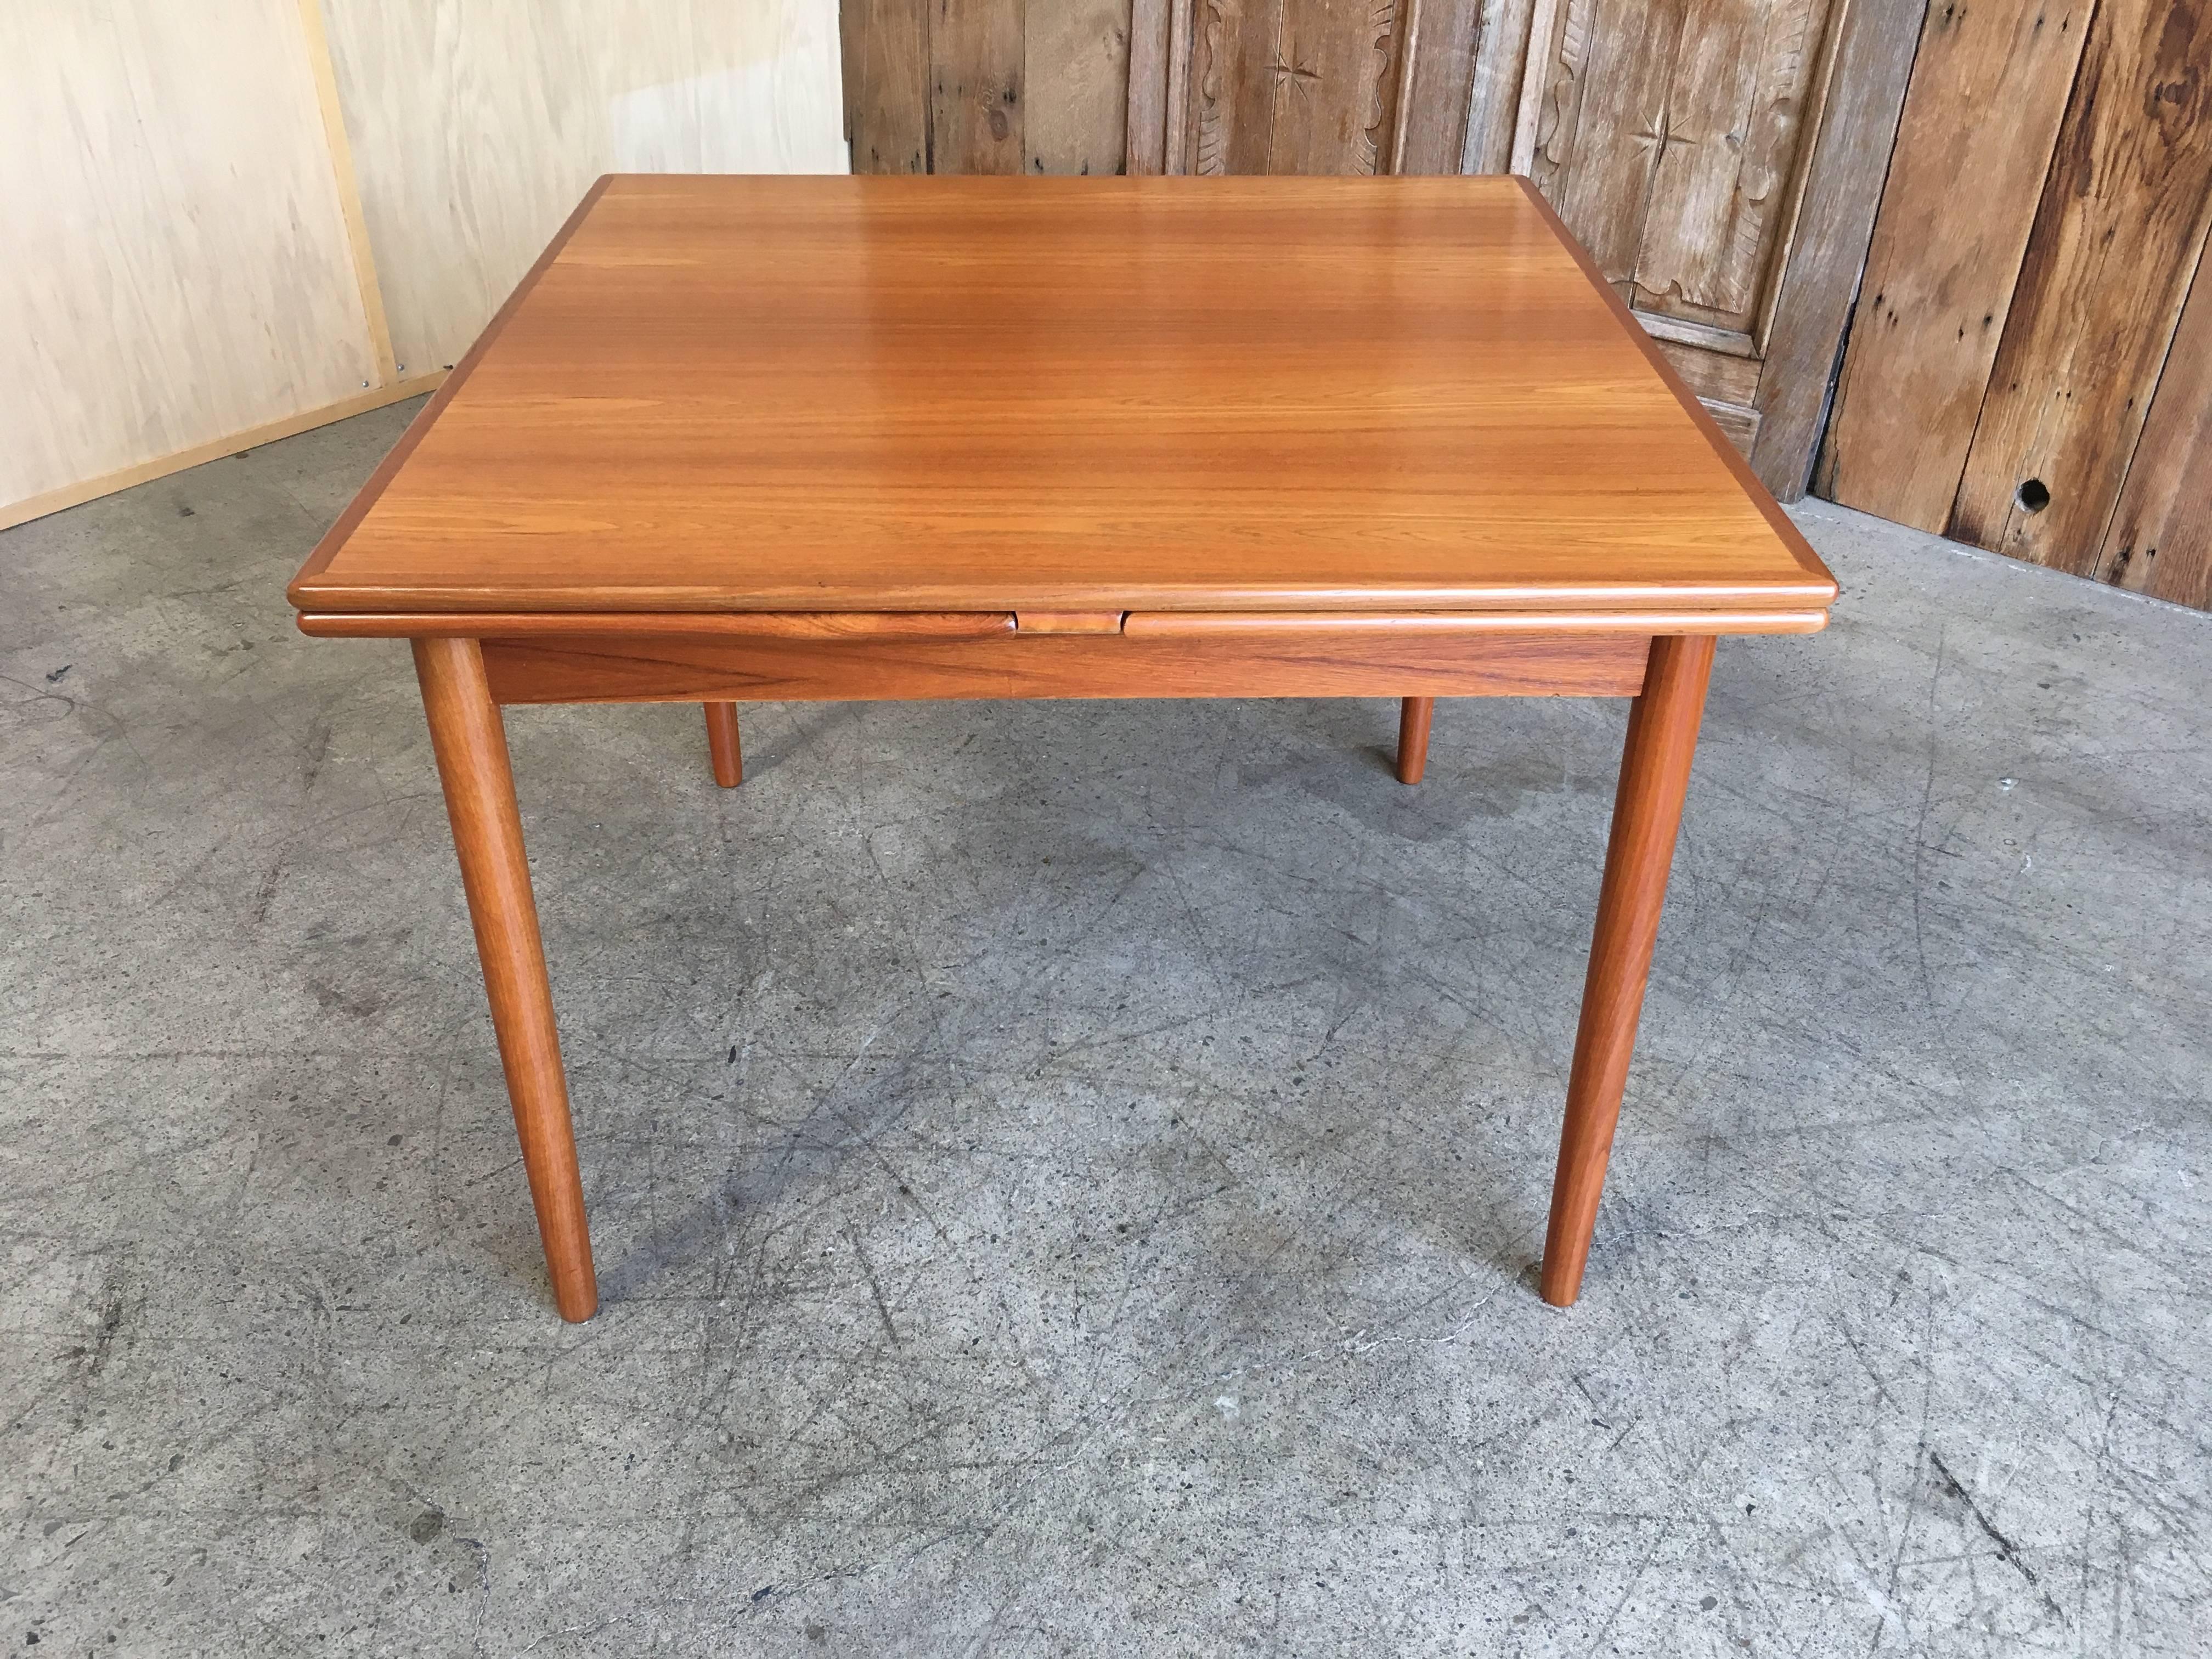 Nice draw leaf table with two leaves each leaf adds 18.25 inches.